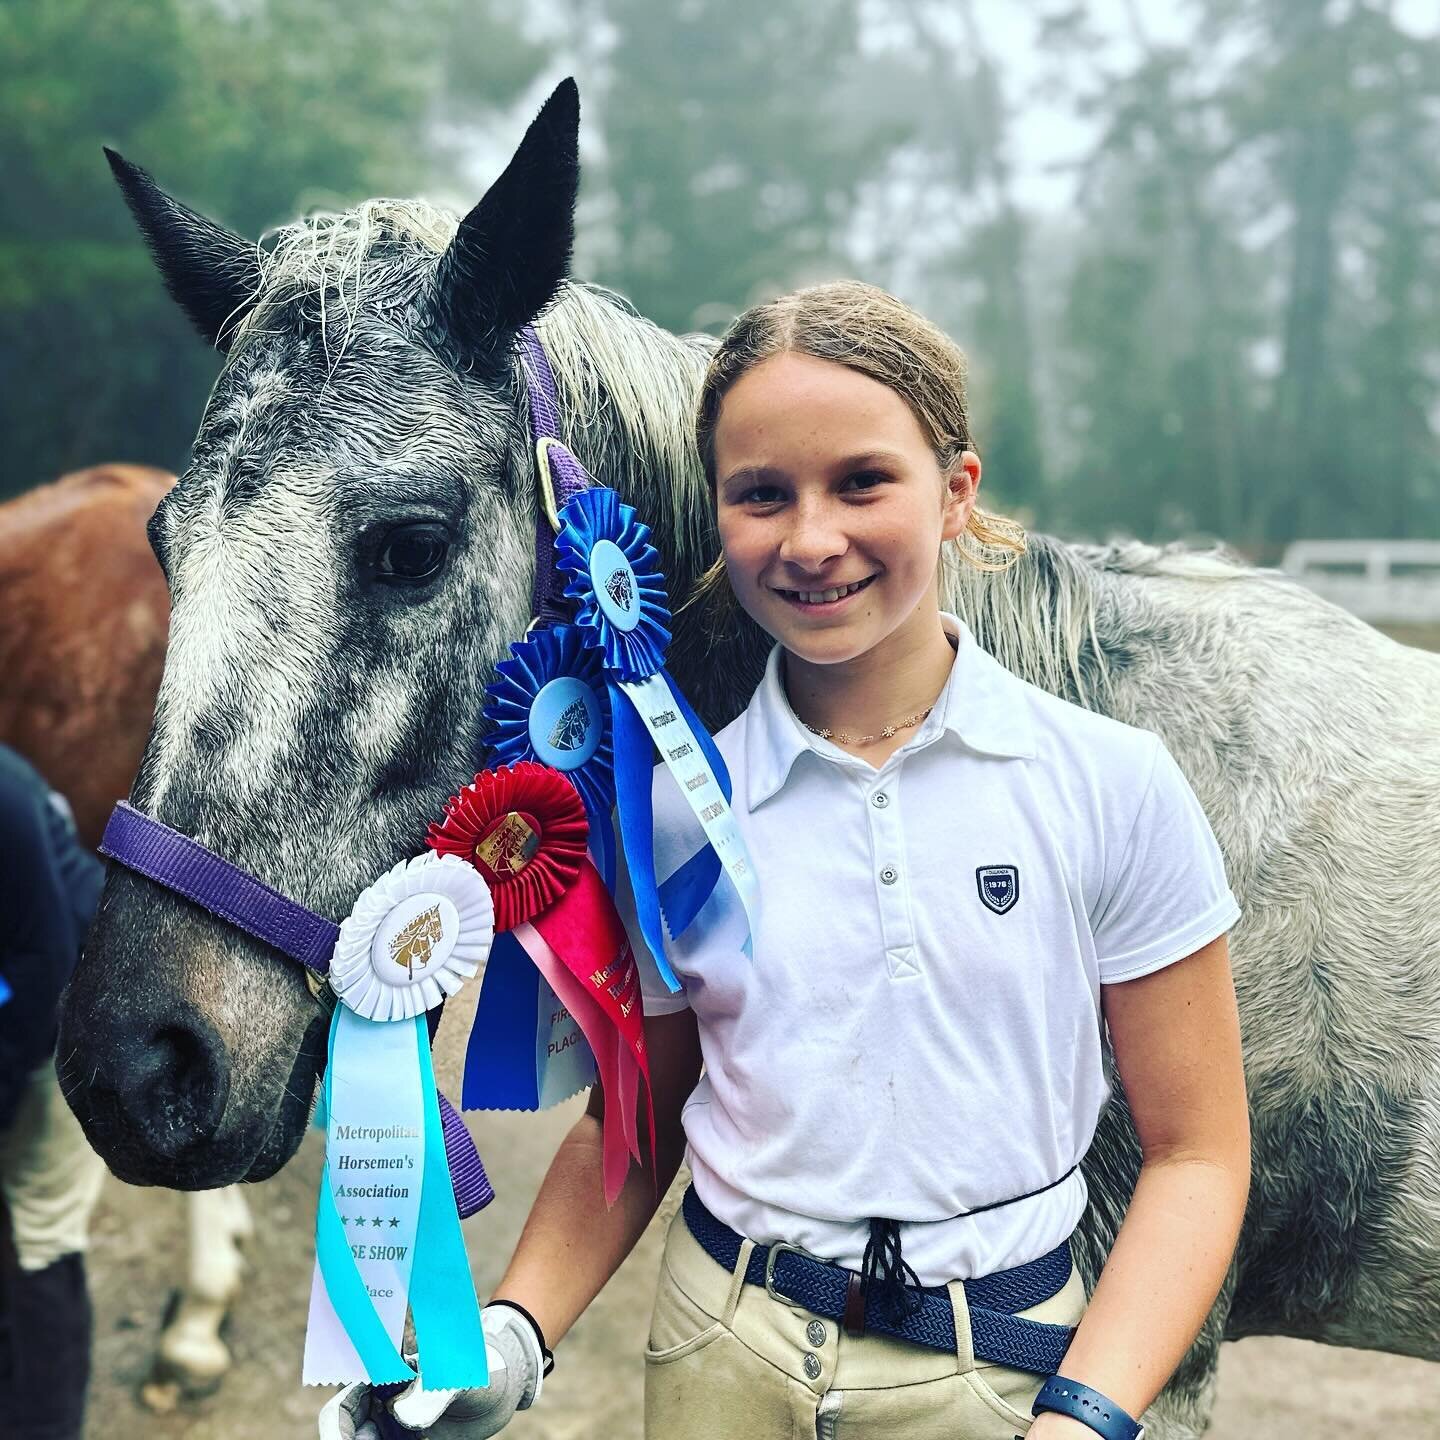 Yo! Rose is an amazing equestrian! She rode her favorite, spicy pony Chelle like a pro today!  Way to go Rose 🌹🙌🏽🎉💥#bringhometheribbons #teamsua #saddleclub